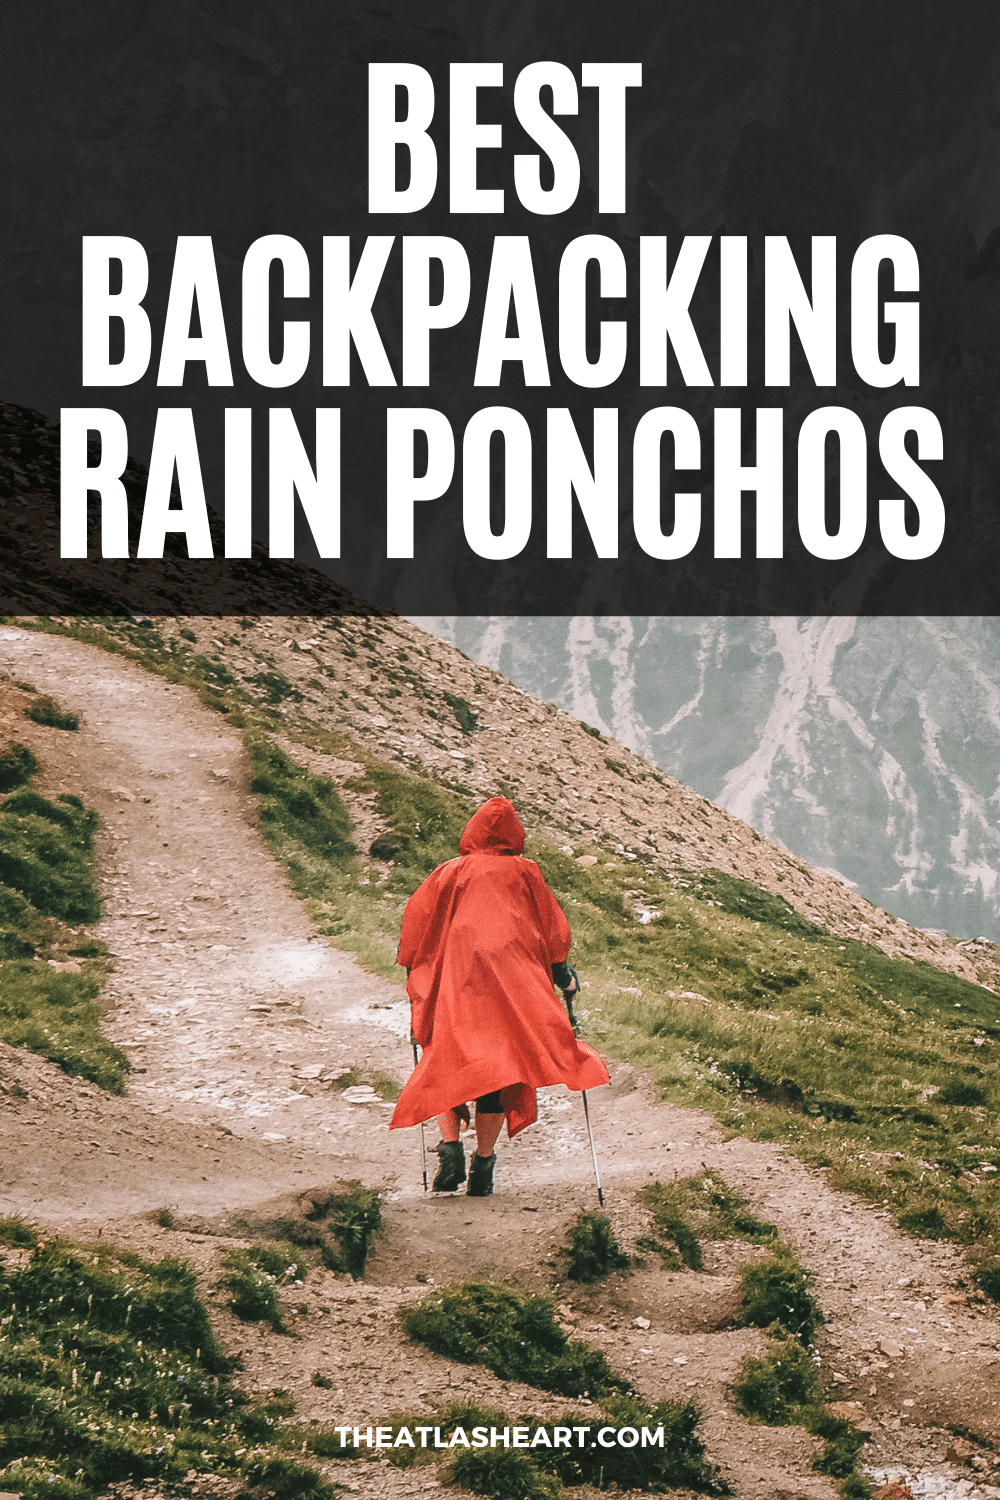 11 Best Backpacking Rain Ponchos to Stay Dry on the Trail in 2022